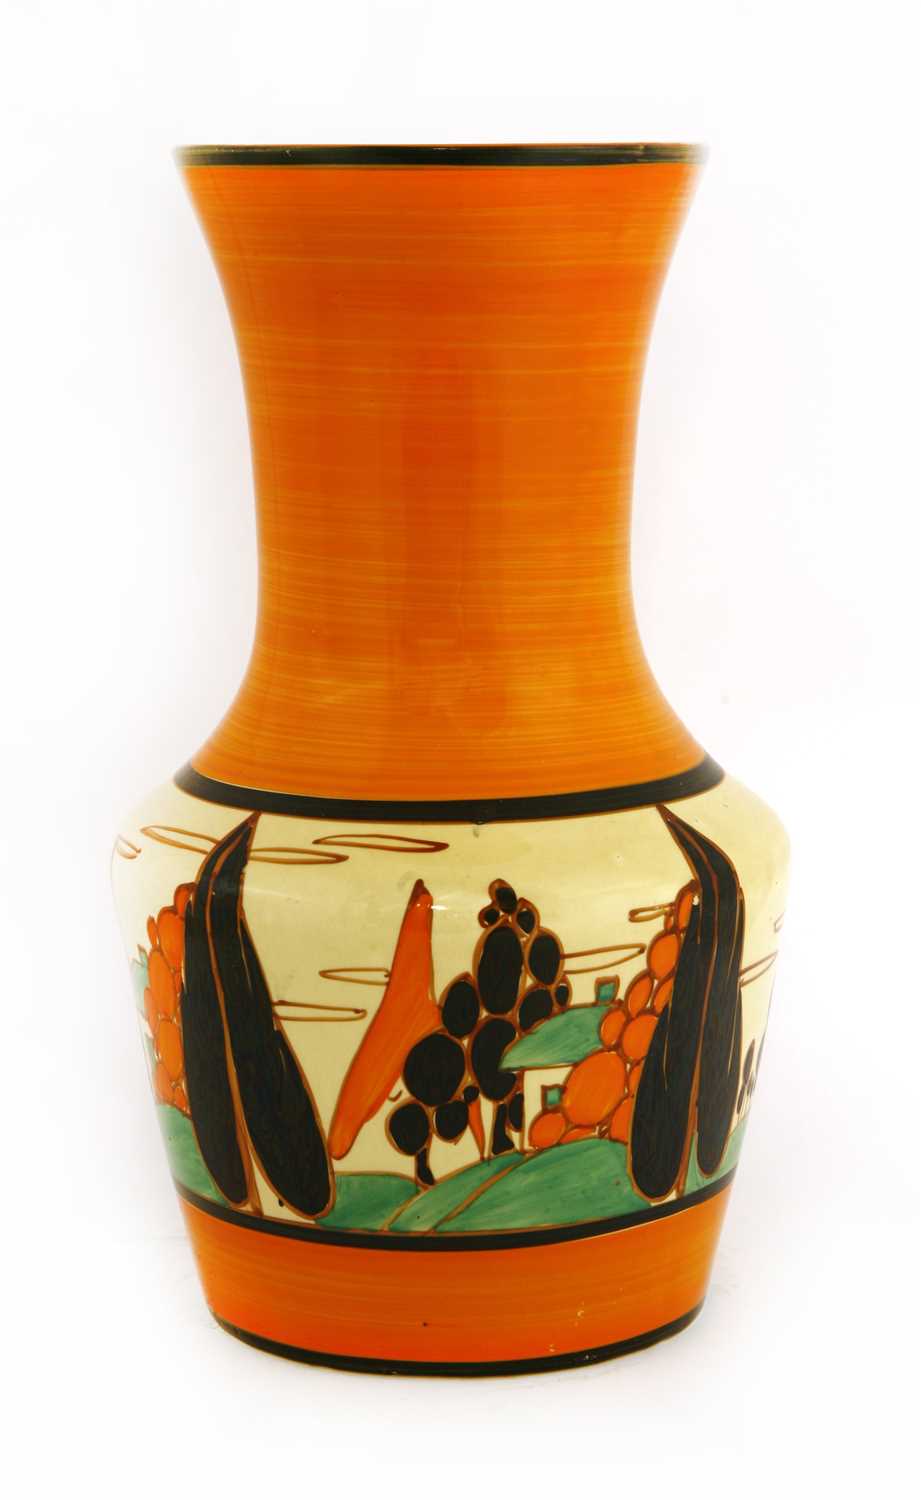 Lot 127 - A Clarice Cliff 'Orange Trees and House' vase